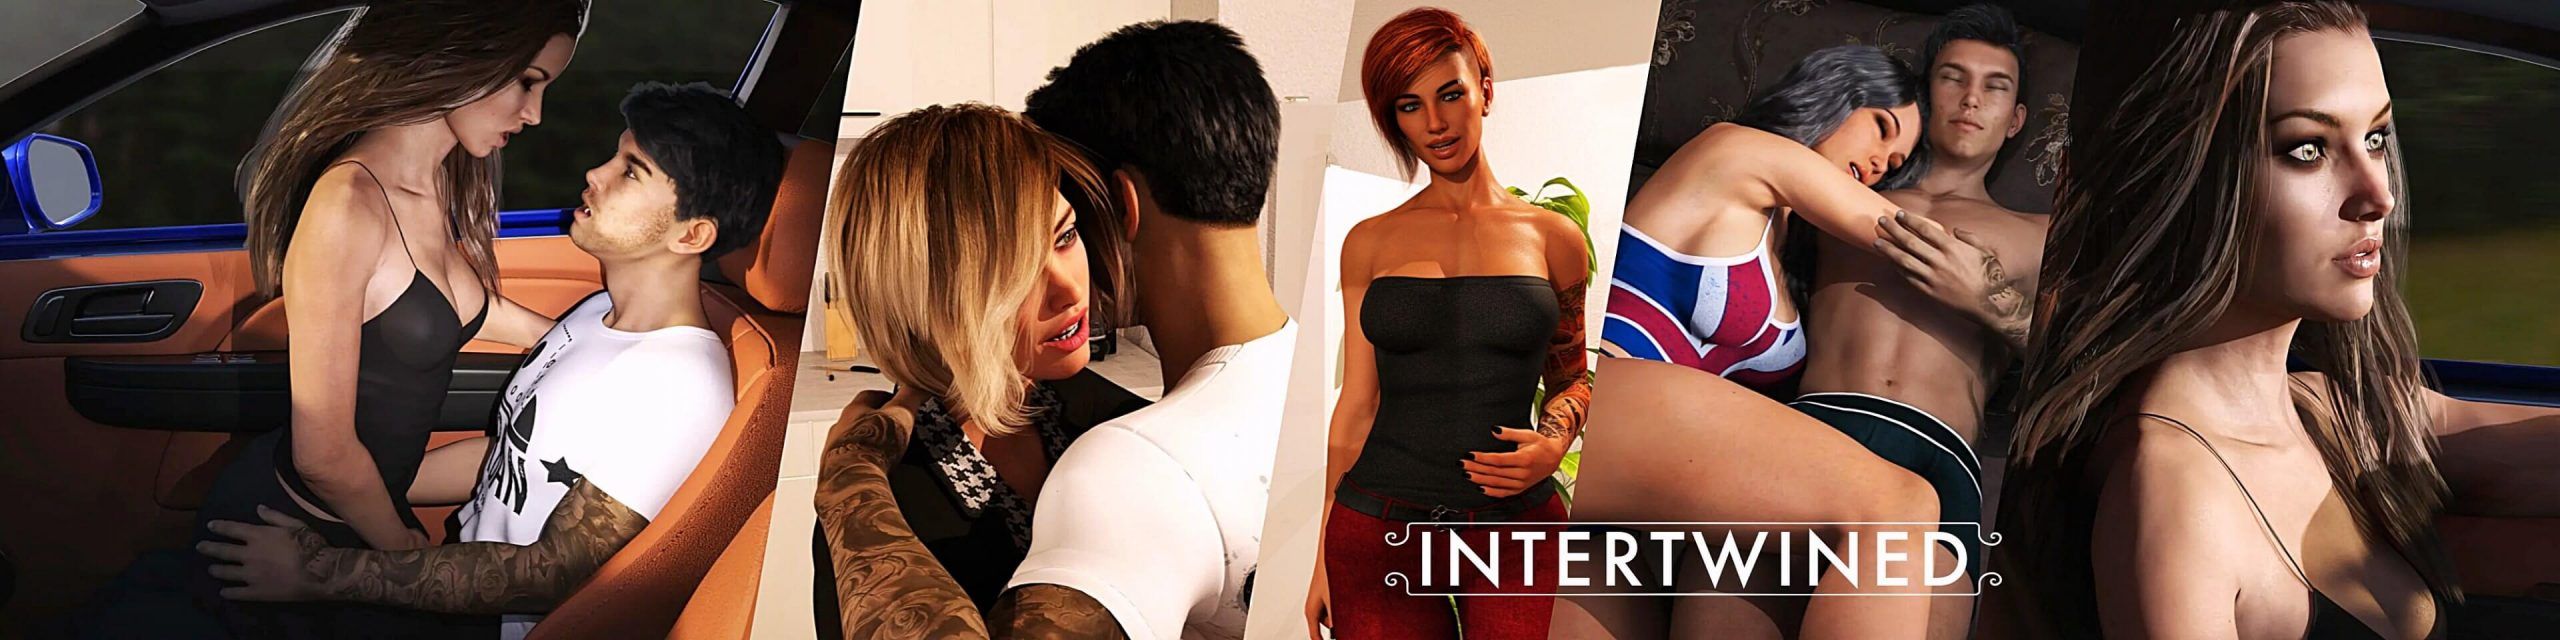 Intertwined [v0.9]